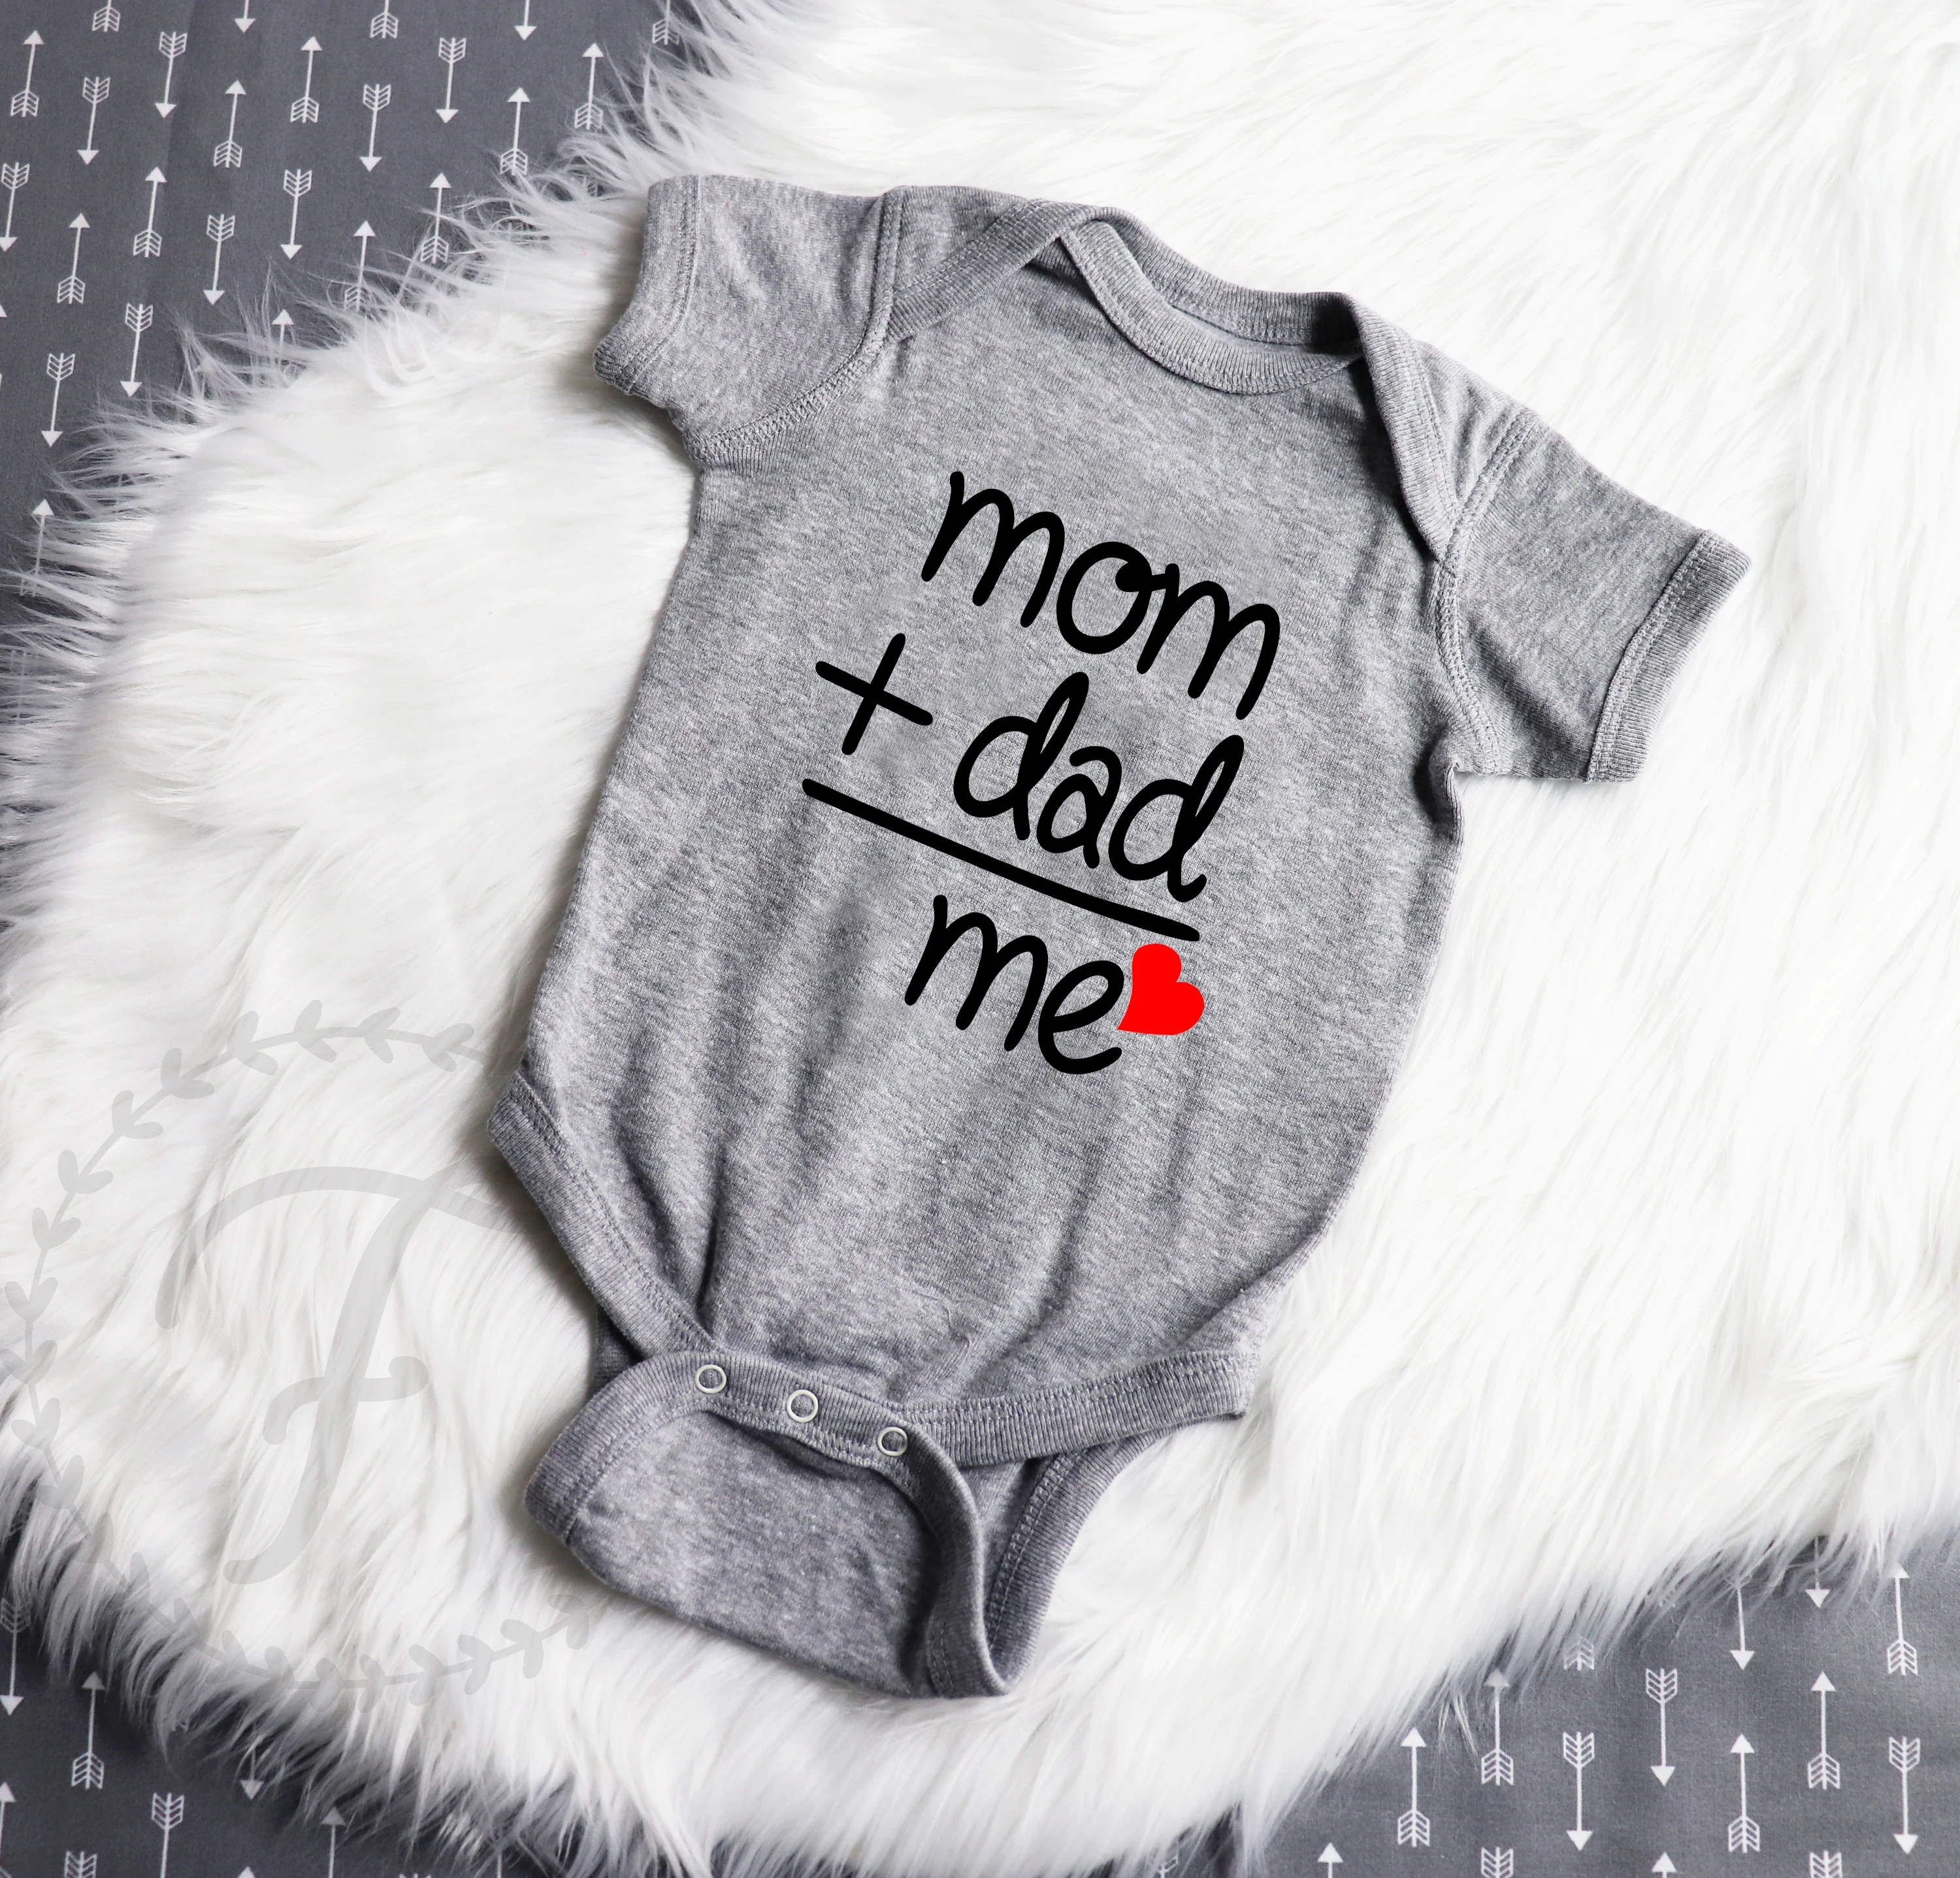 

Mom+Dad=Me Love Graphic Printed Baby Fashion Grey Onesies Infant Cotton Bodysuit Boys Girls Toddler Soft Wear Rompers